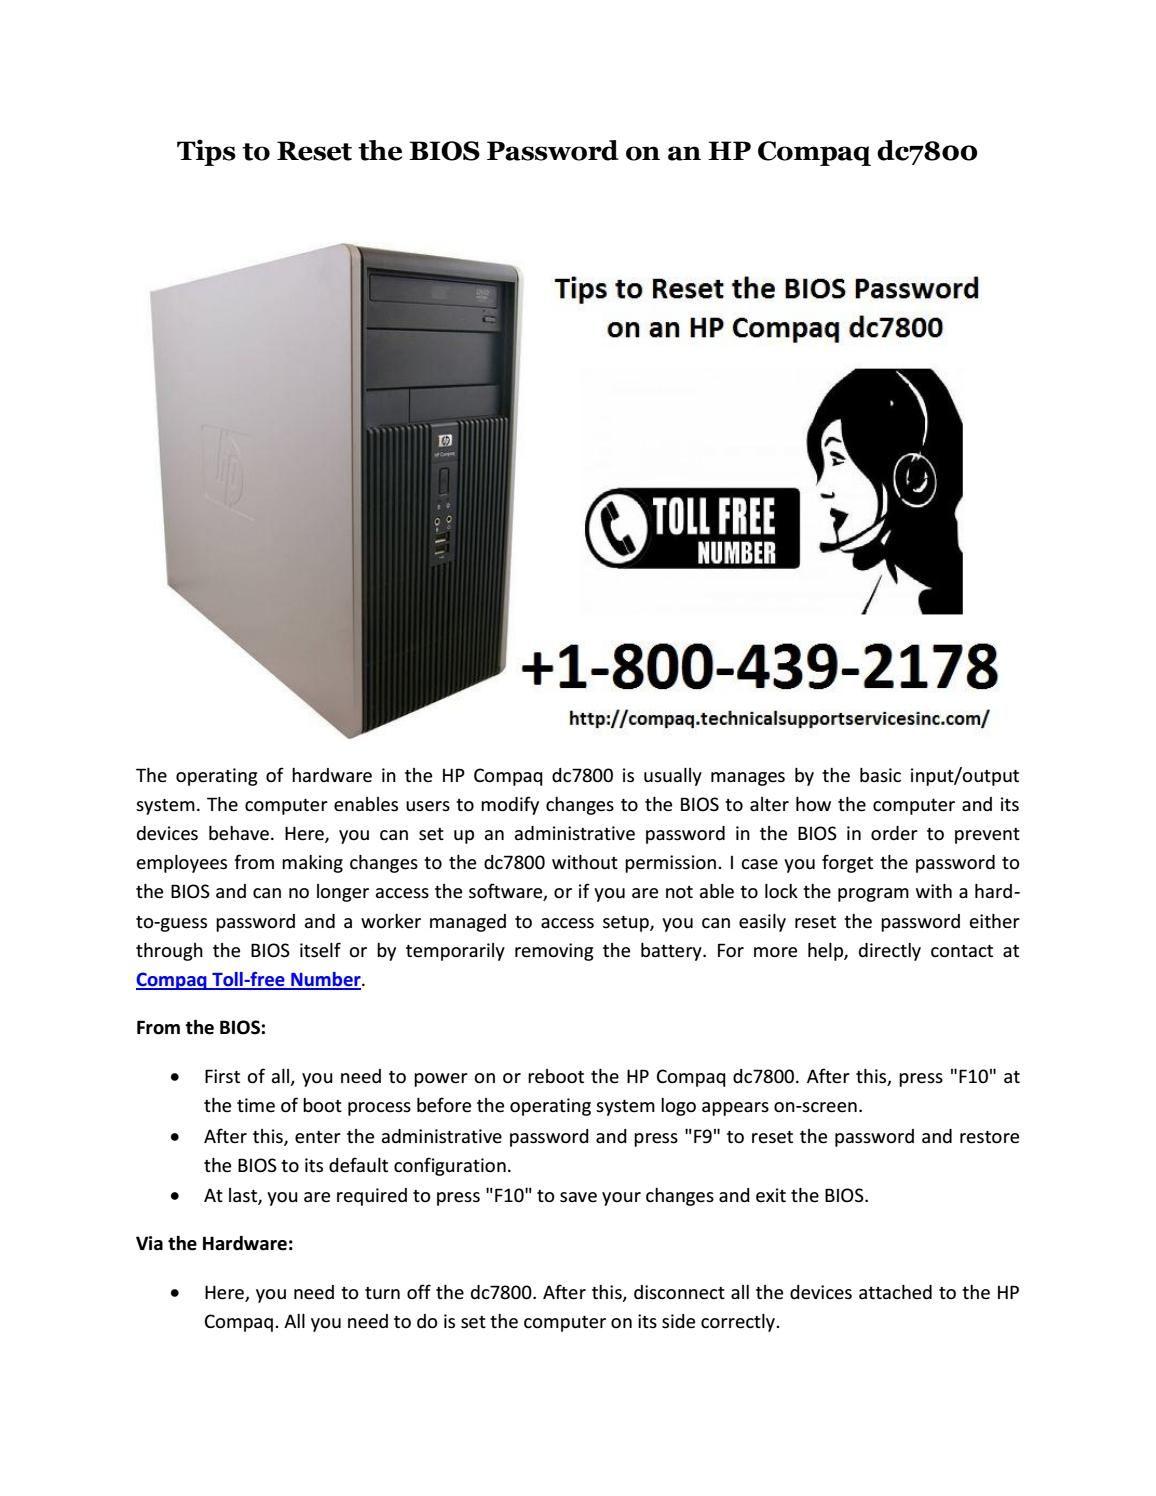 Compaq System Logo - Tips to Reset the BIOS Password on an HP Compaq dc7800